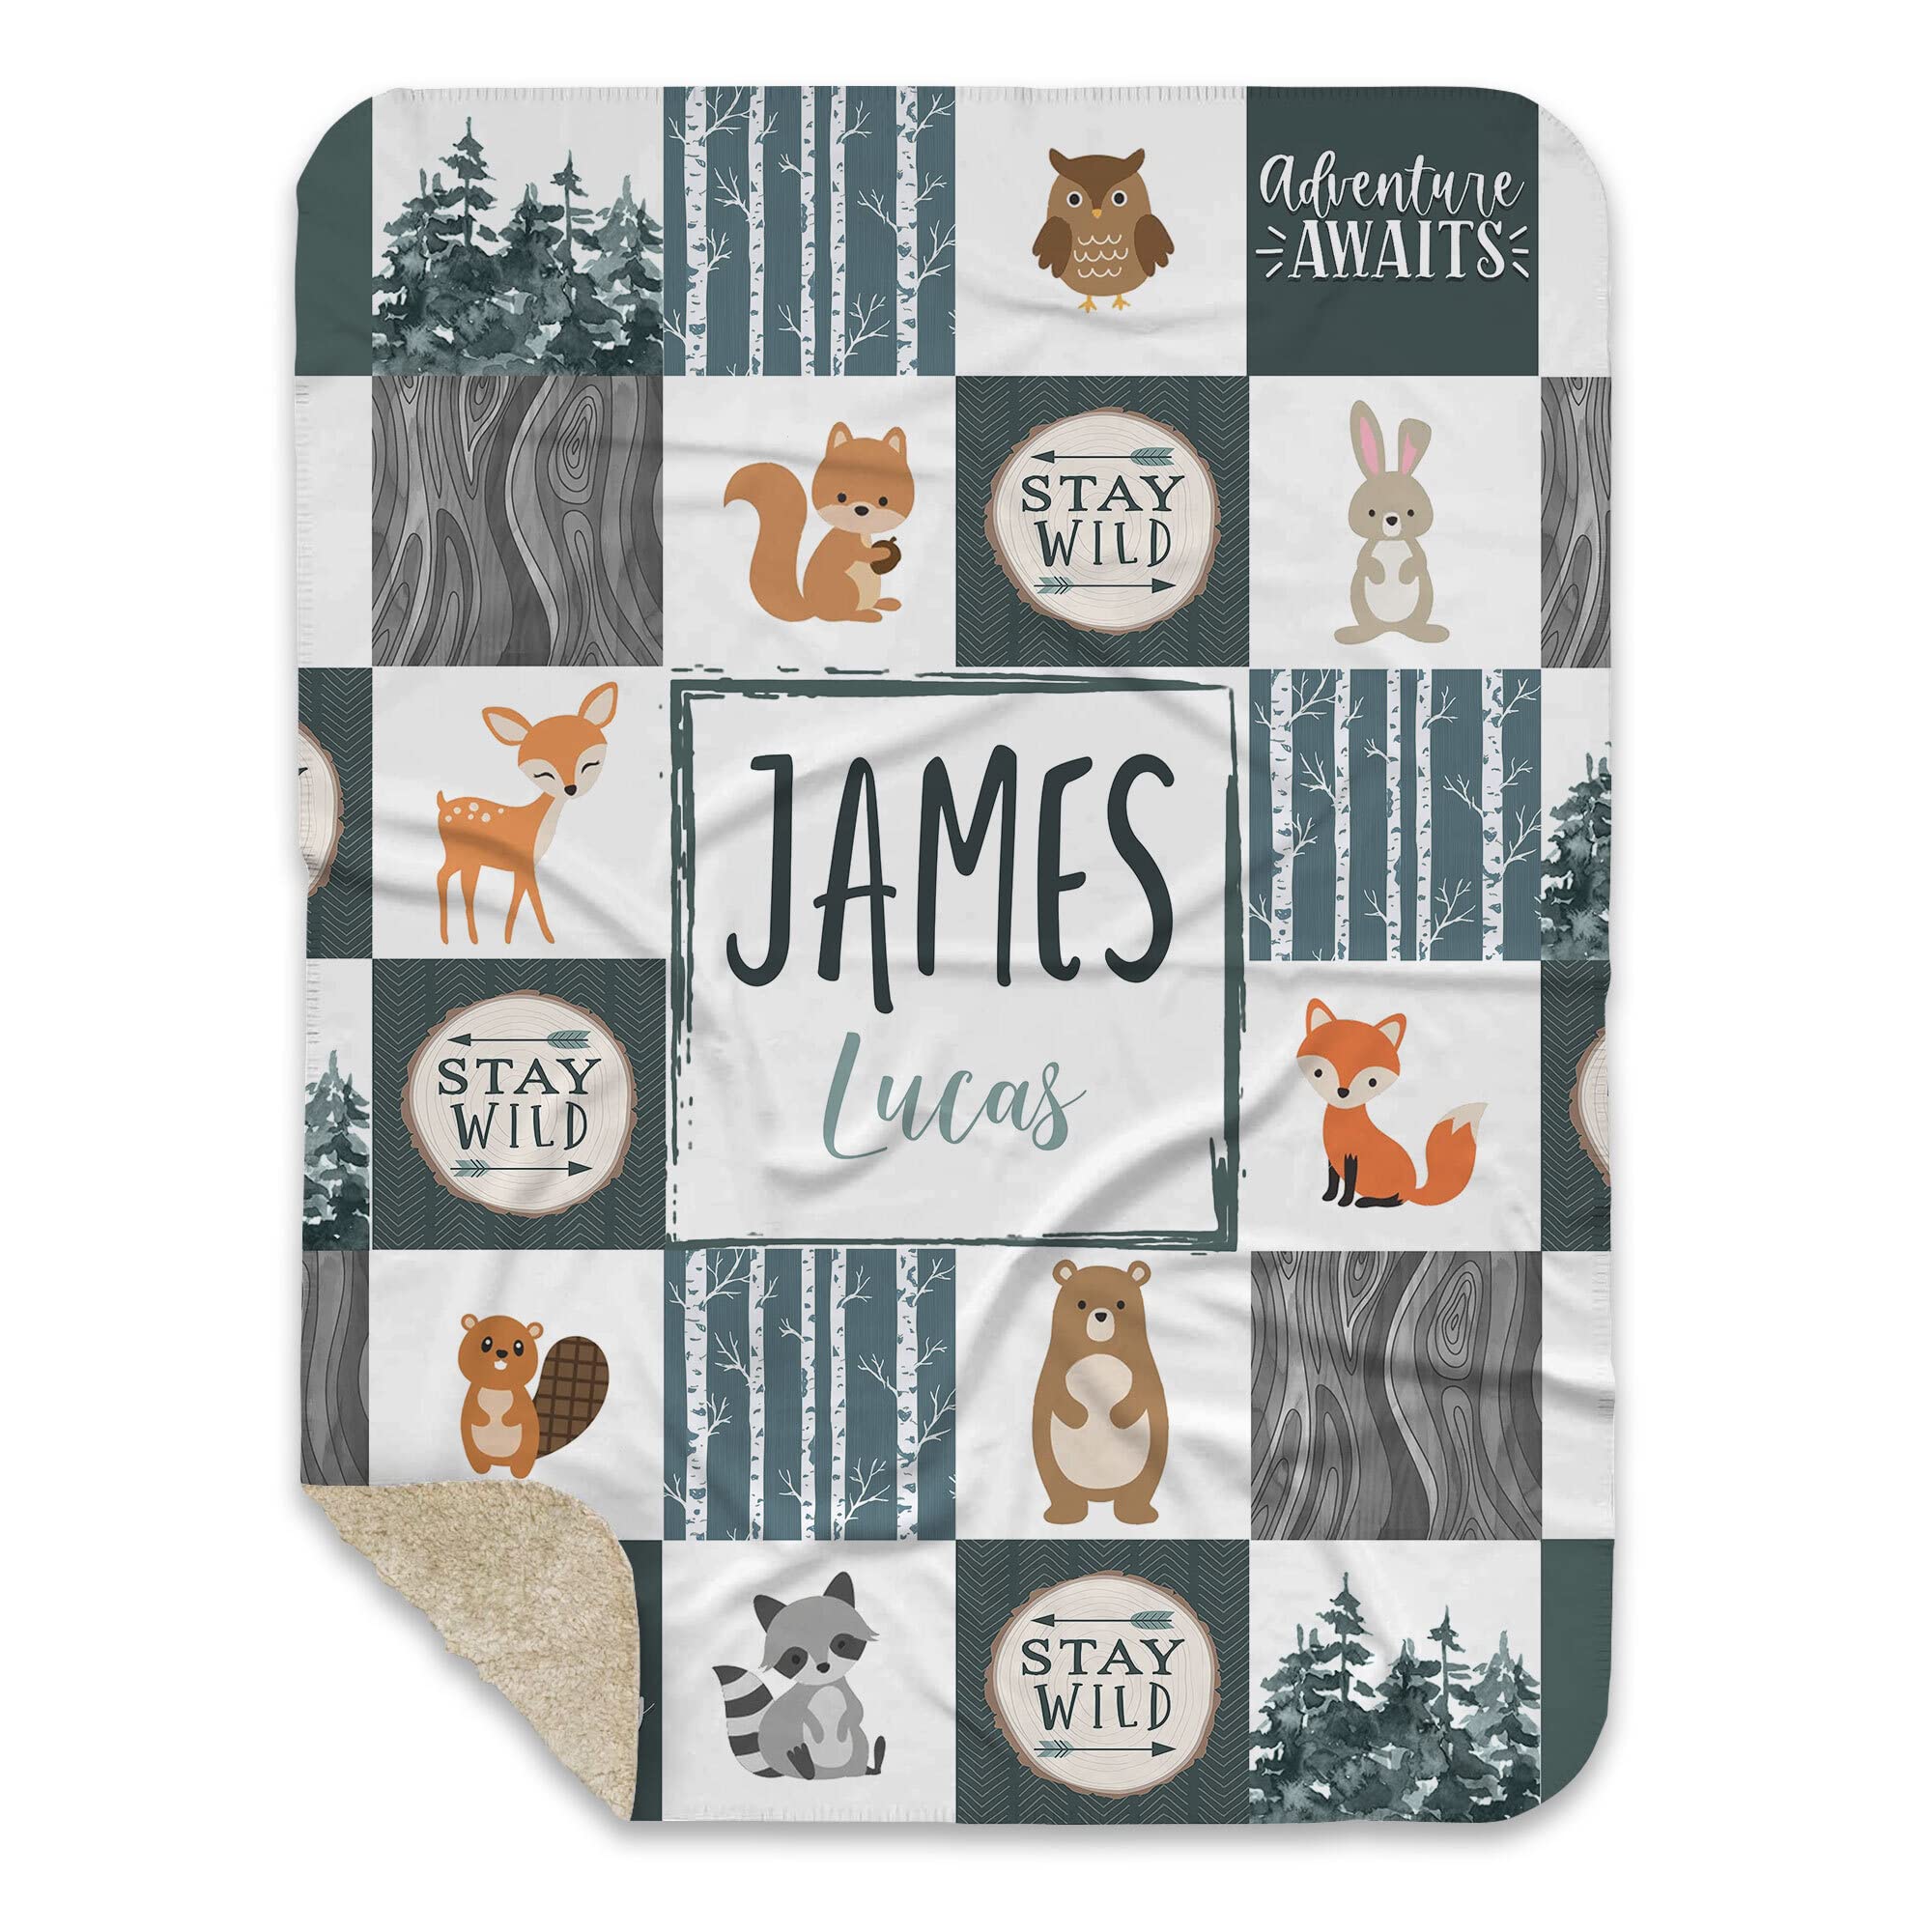 MDPrints Woodland Personalized Baby Blankets - Custom Baby Blanket with Name for Boys - Soft Plush Fleece (Woodland 214b)